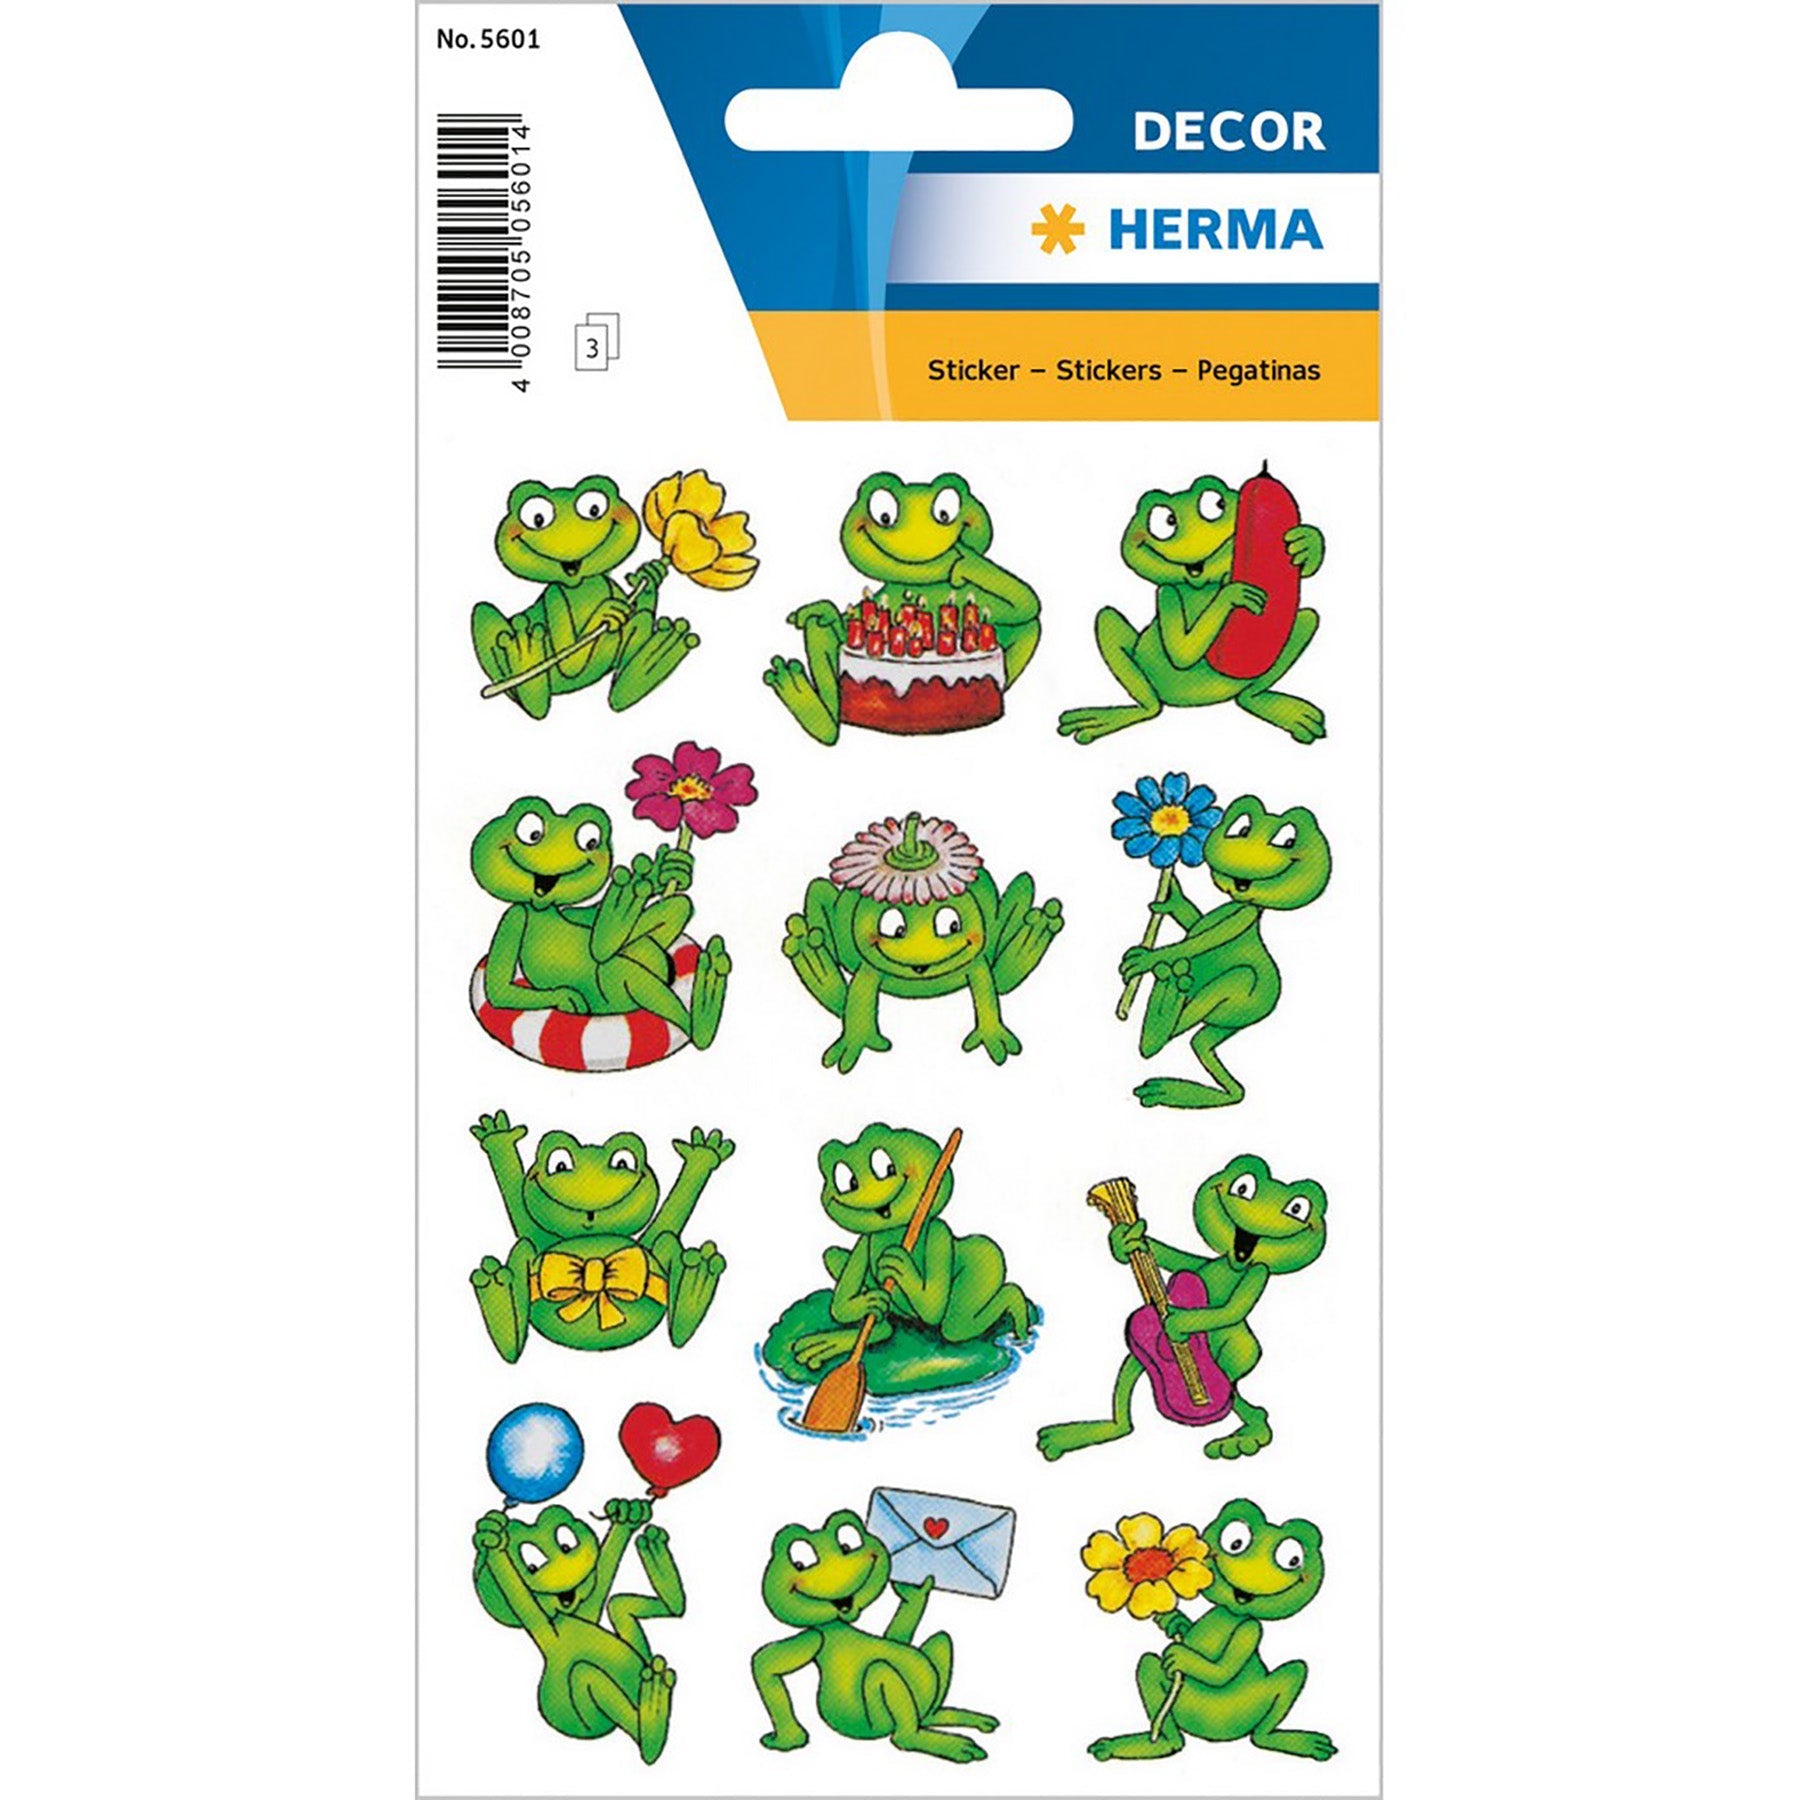 Herma Decor 3 Sheets Stickers Frogs 4.75x3.1in Sheet